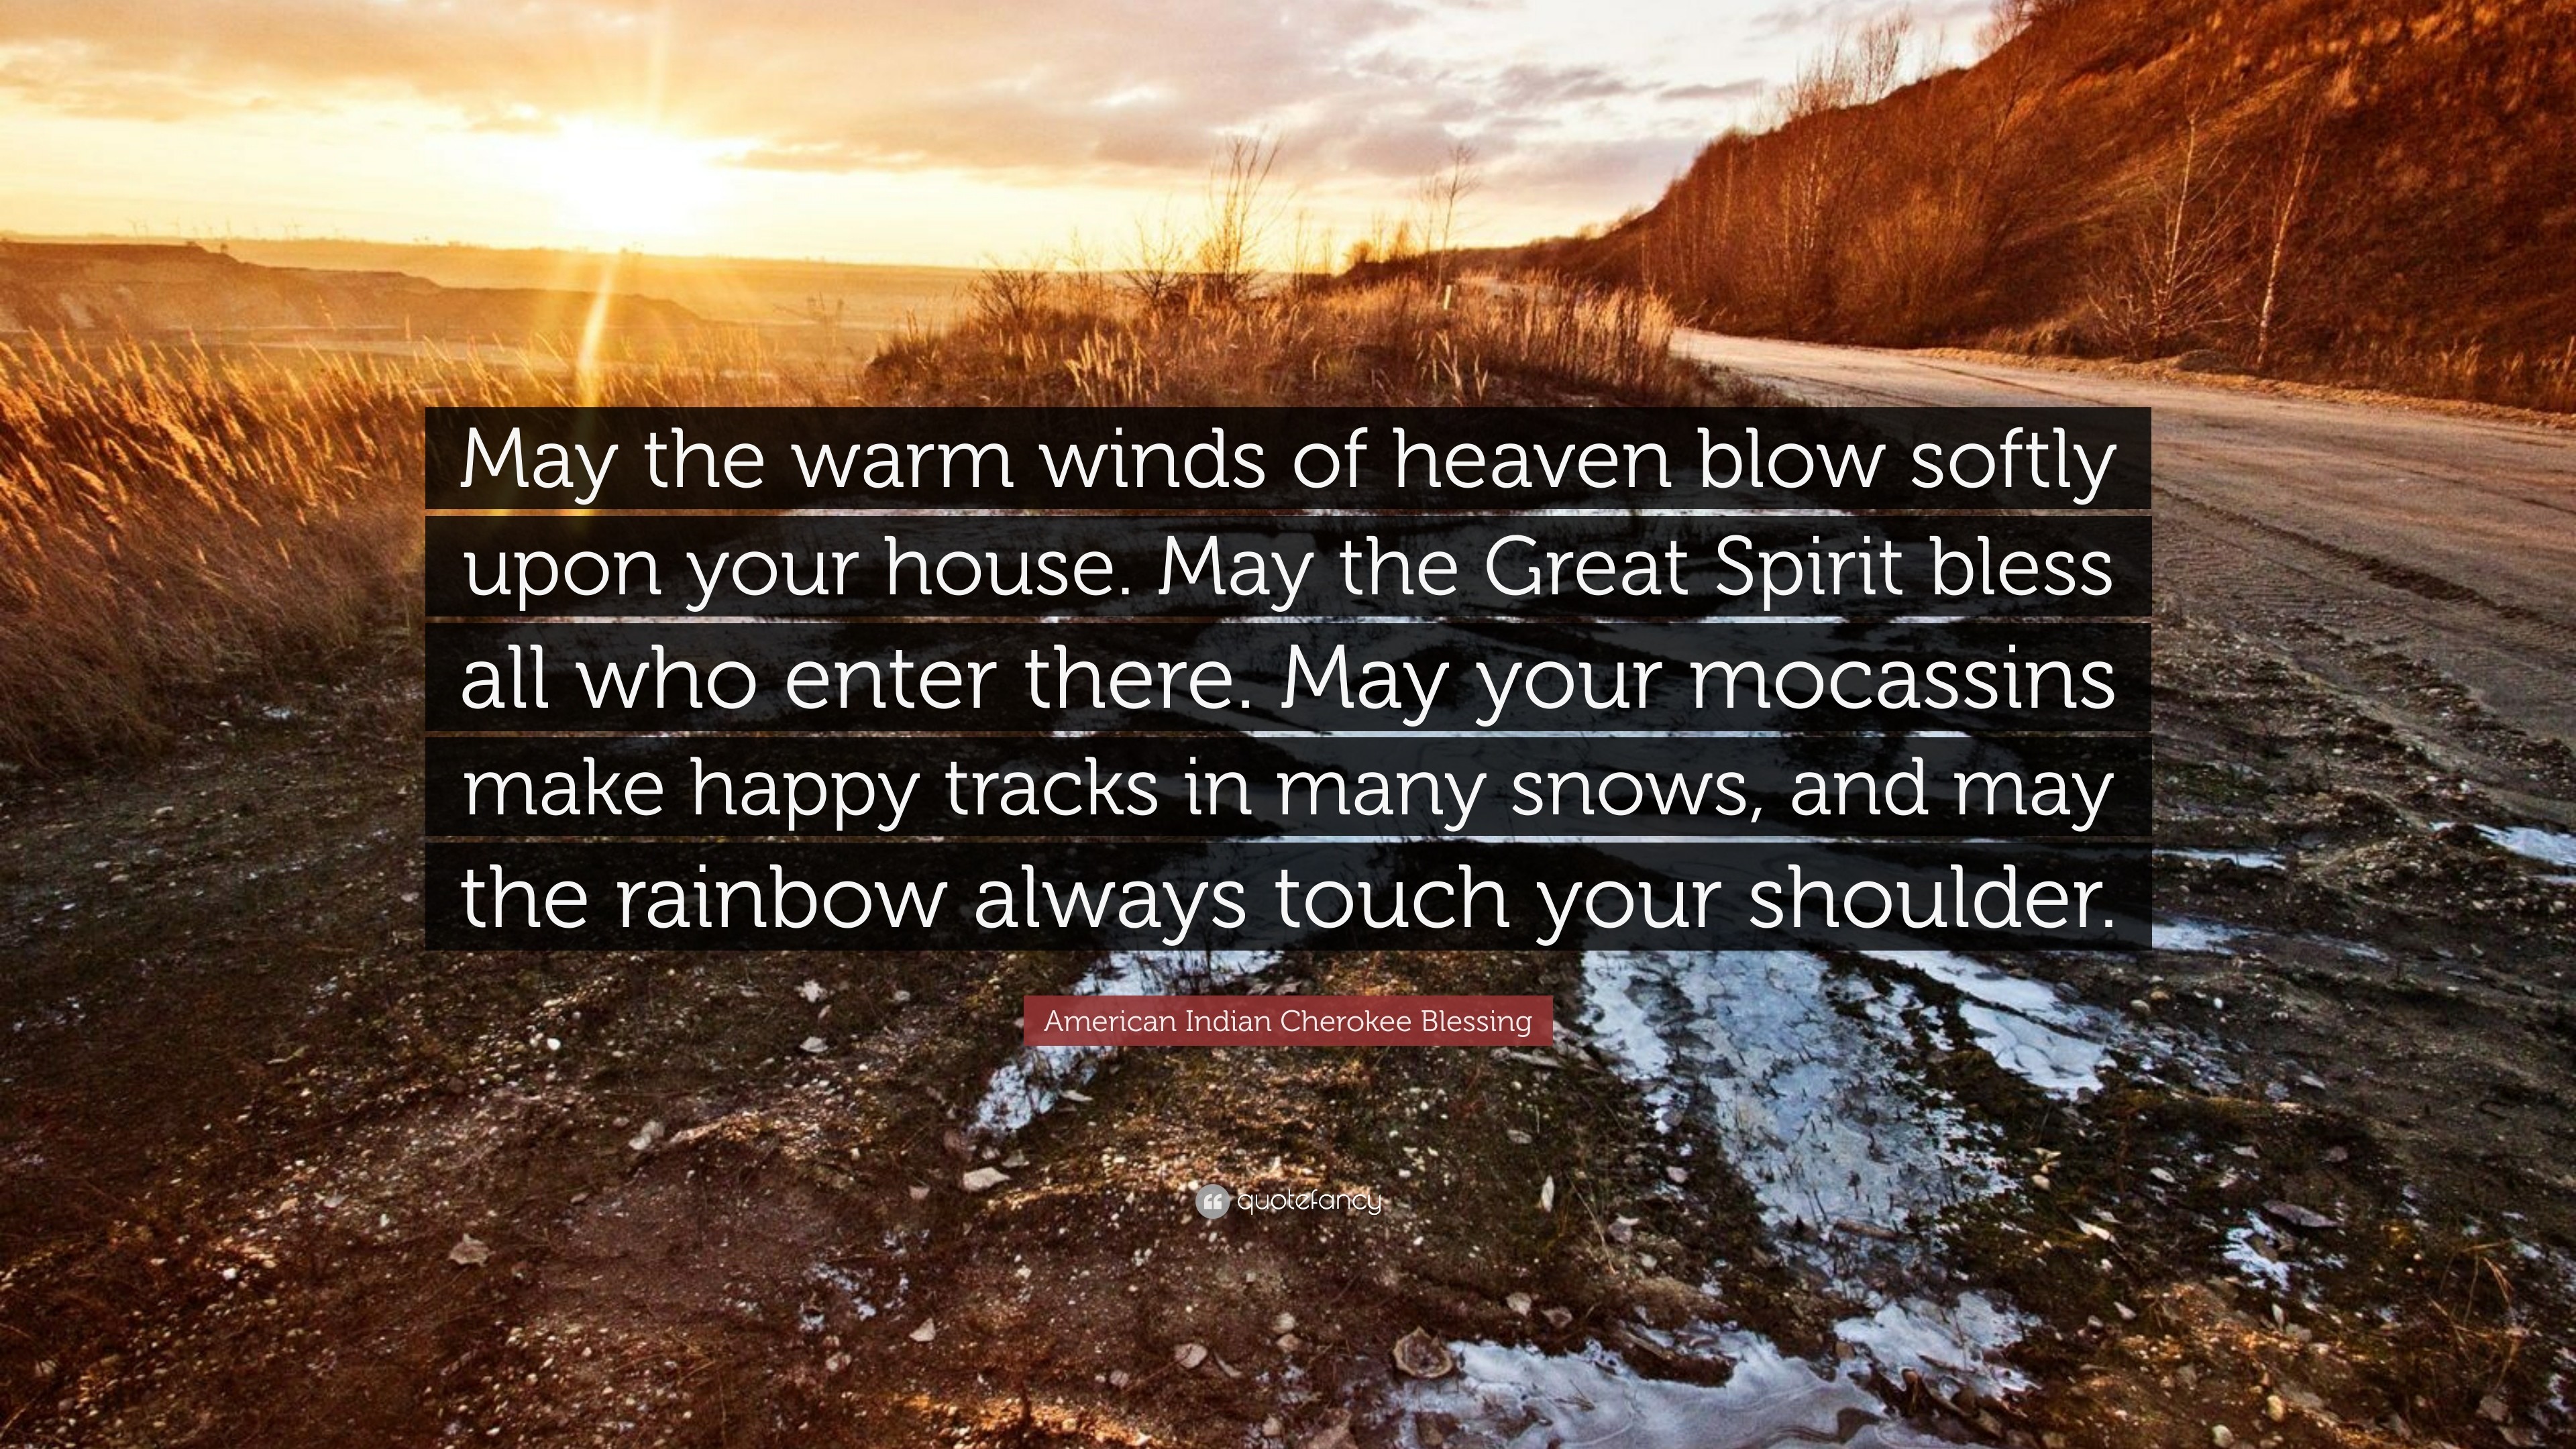 3840x2160 American Indian Cherokee Blessing Quote: “May the warm winds of heaven blow  softly upon